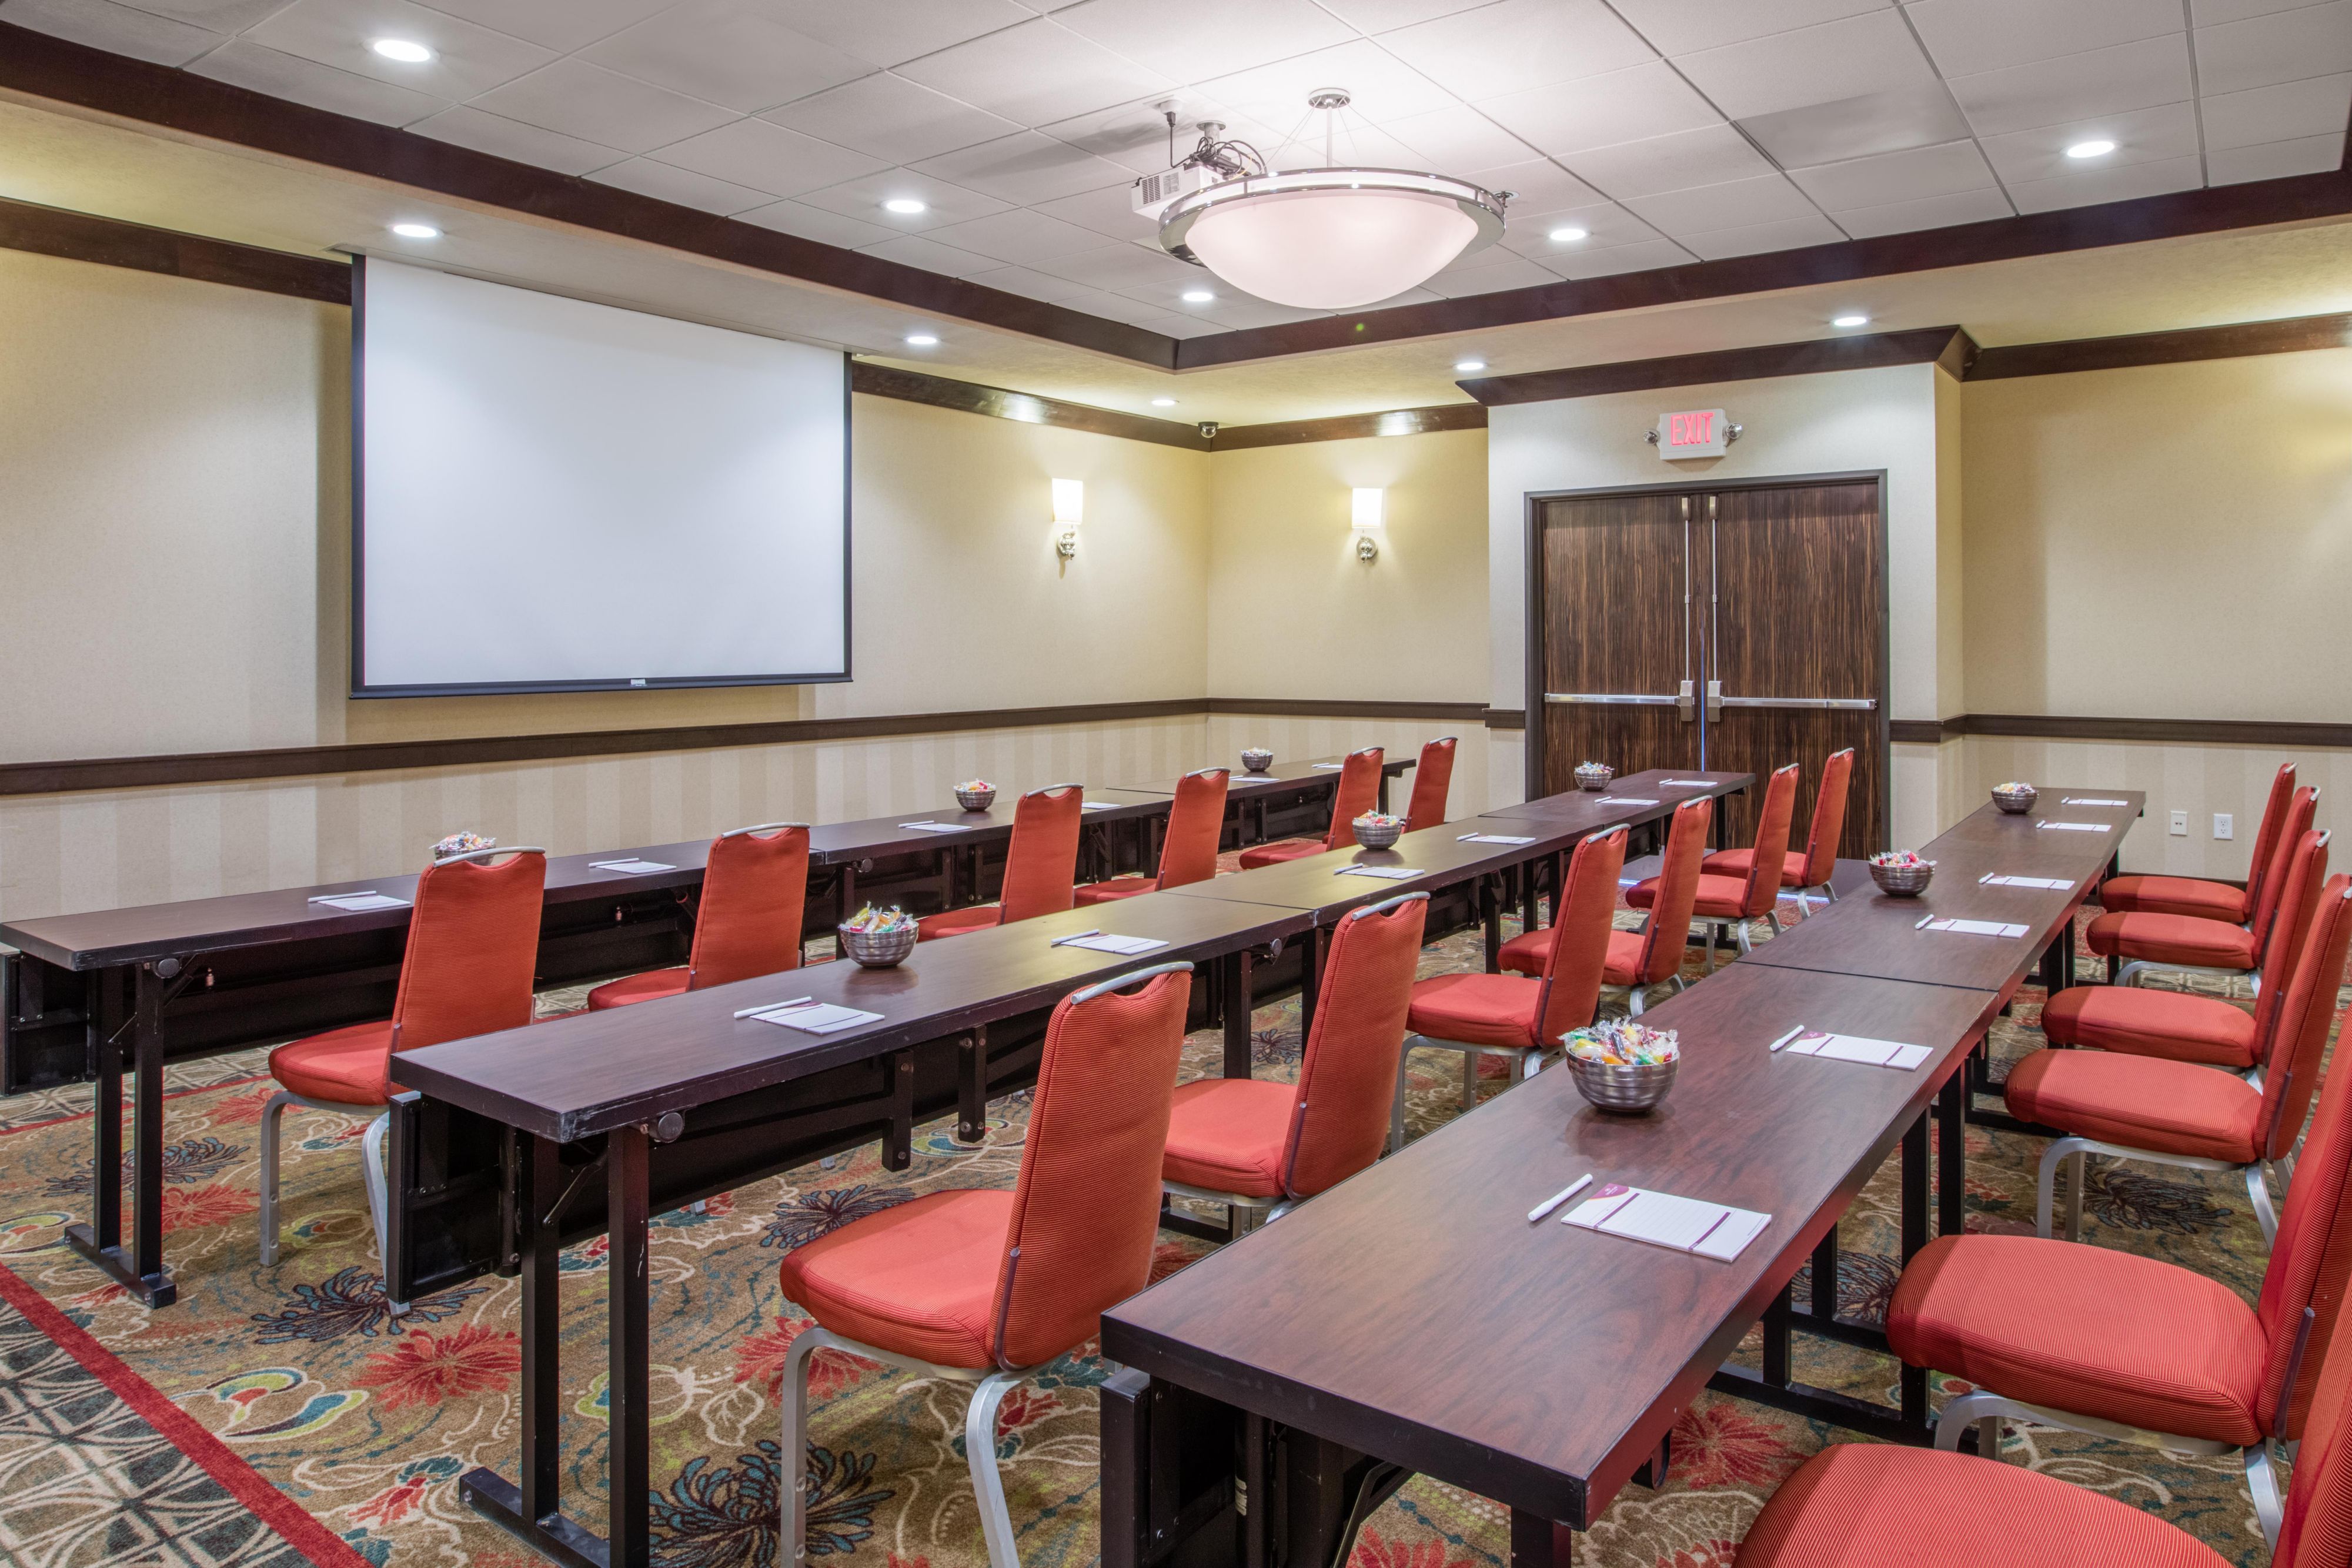 Our meeting room is perfect for your next training session